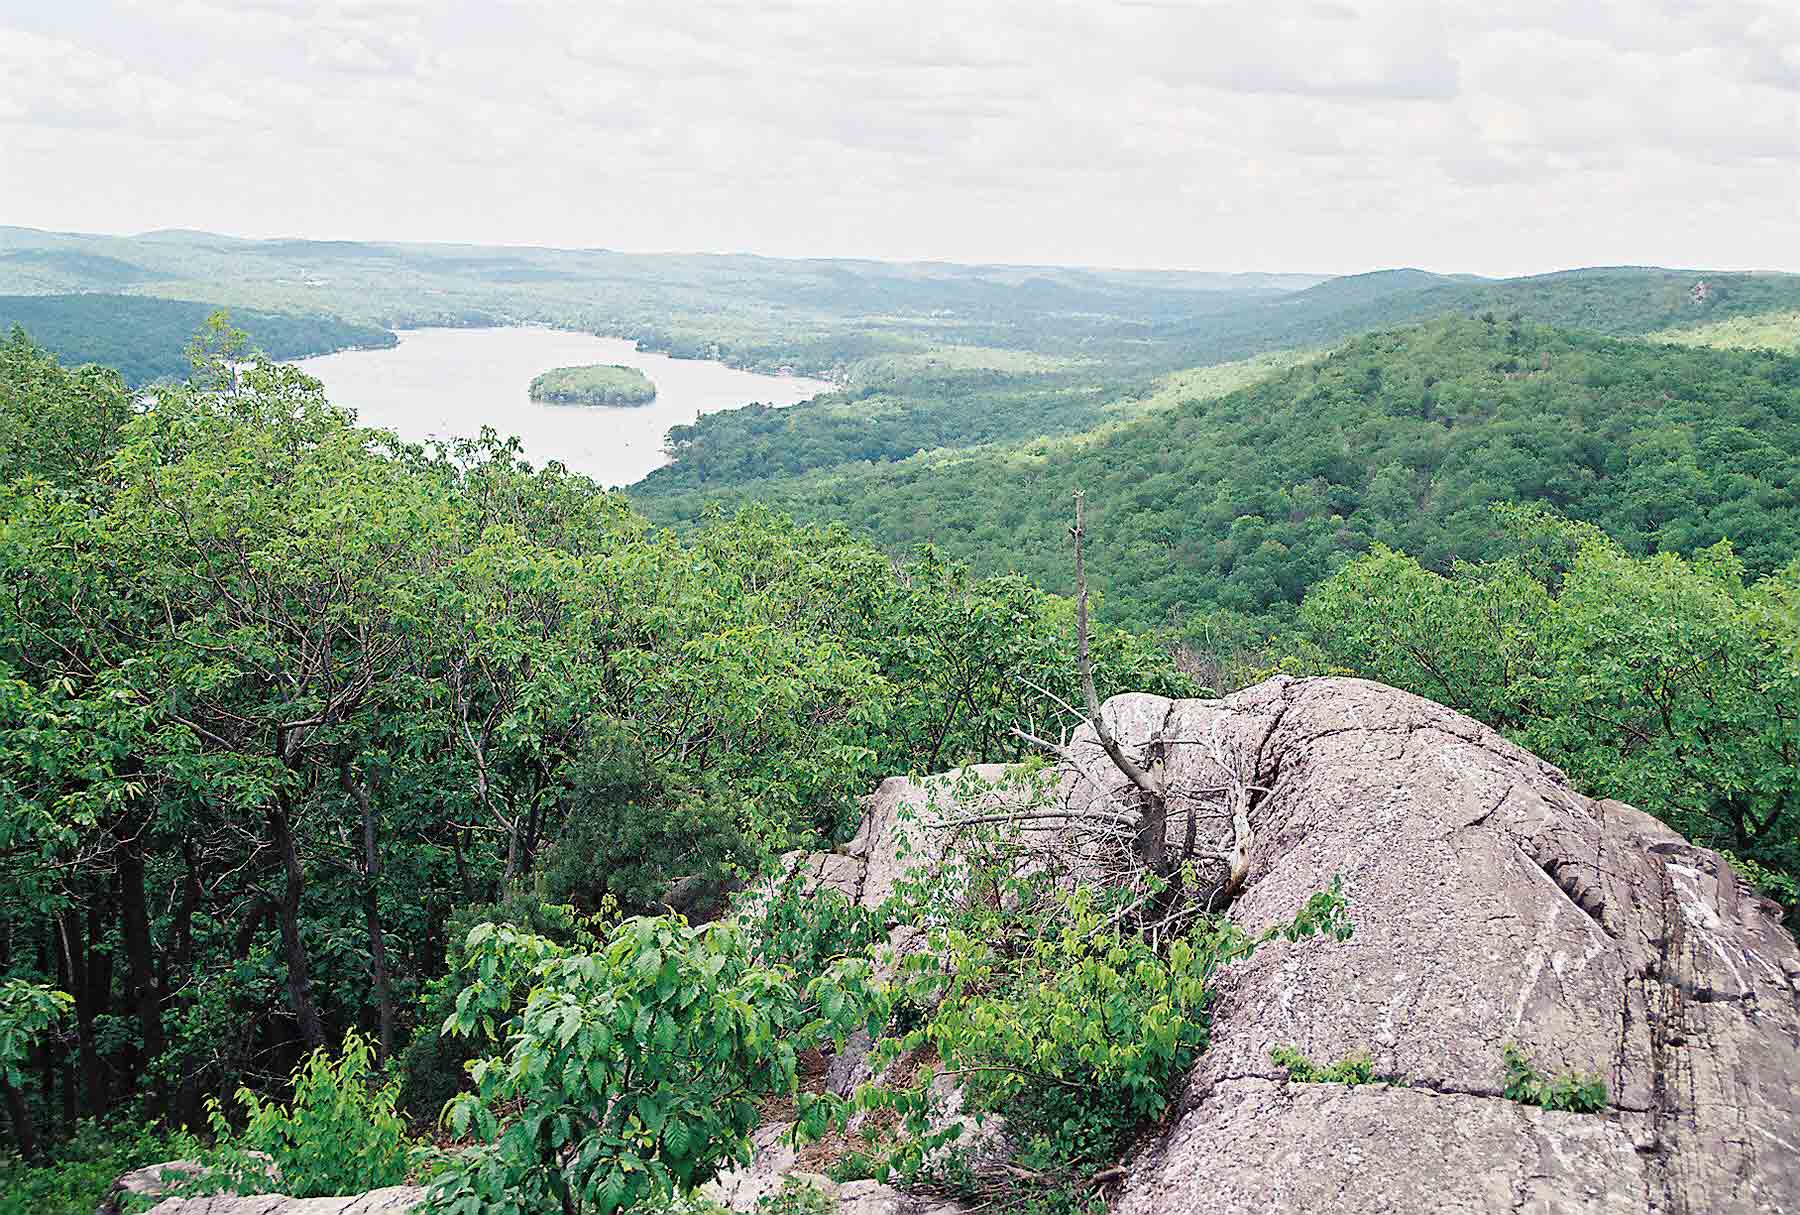 mm 4.2 View of Greenwood Lake from Bearfort Mountain. Courtesy dlcul@conncoll.edu